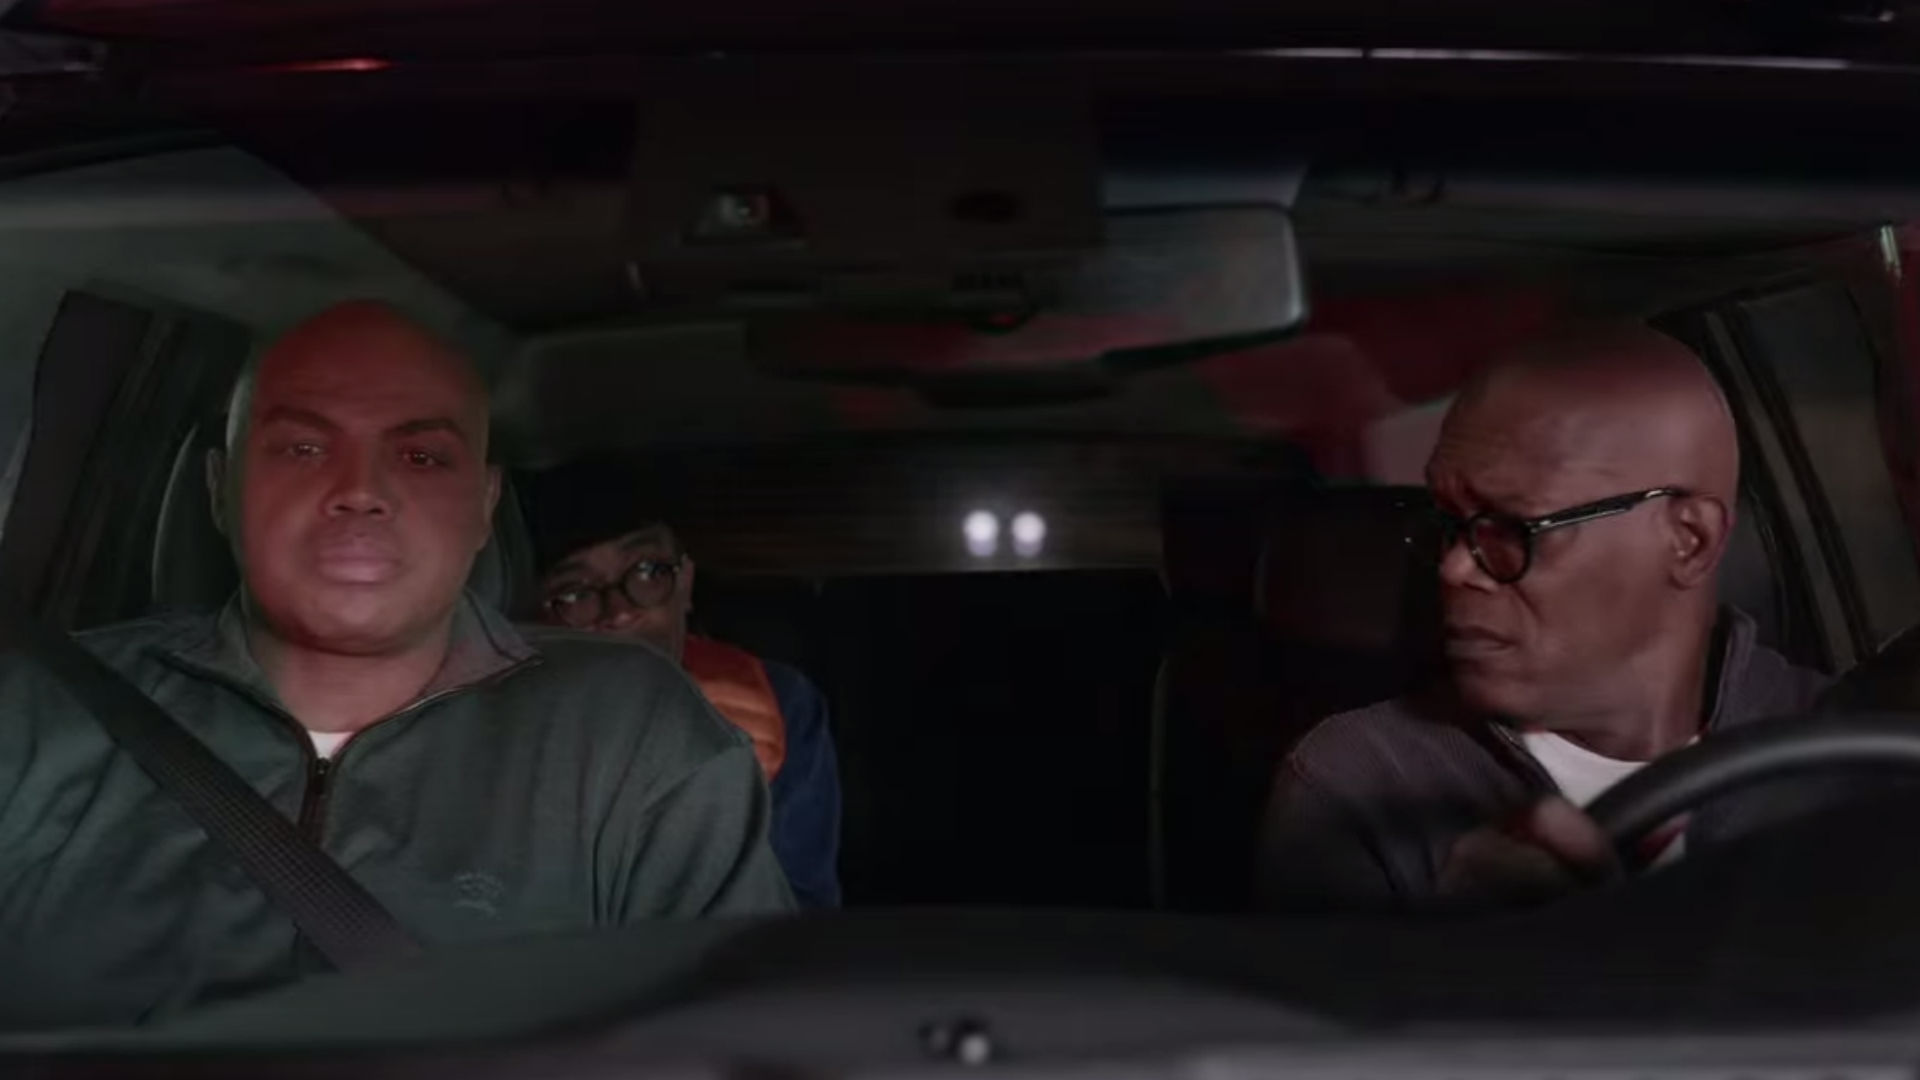 Charles Barkley, Samuel L. Jackson, and Spike Lee star in Final Four commercials ...1920 x 1080